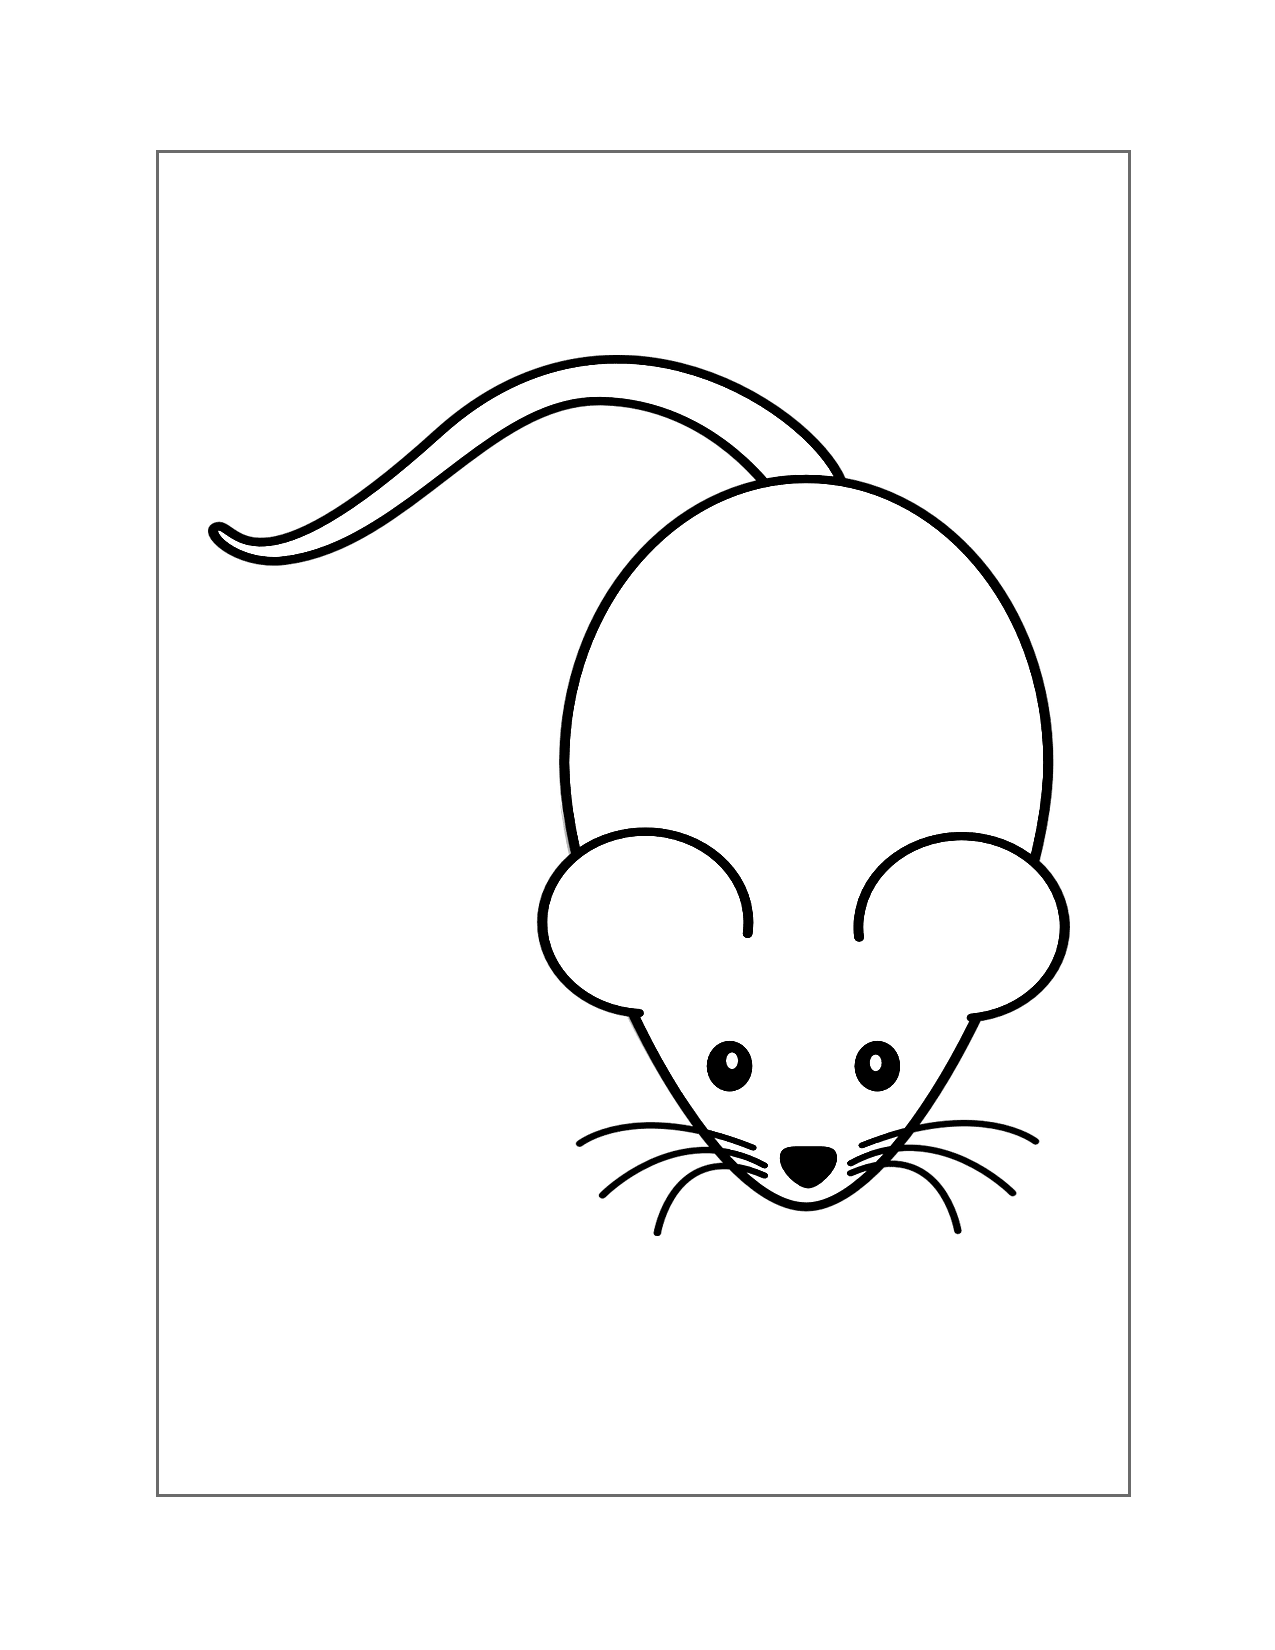 Mouse From Above Coloring Page